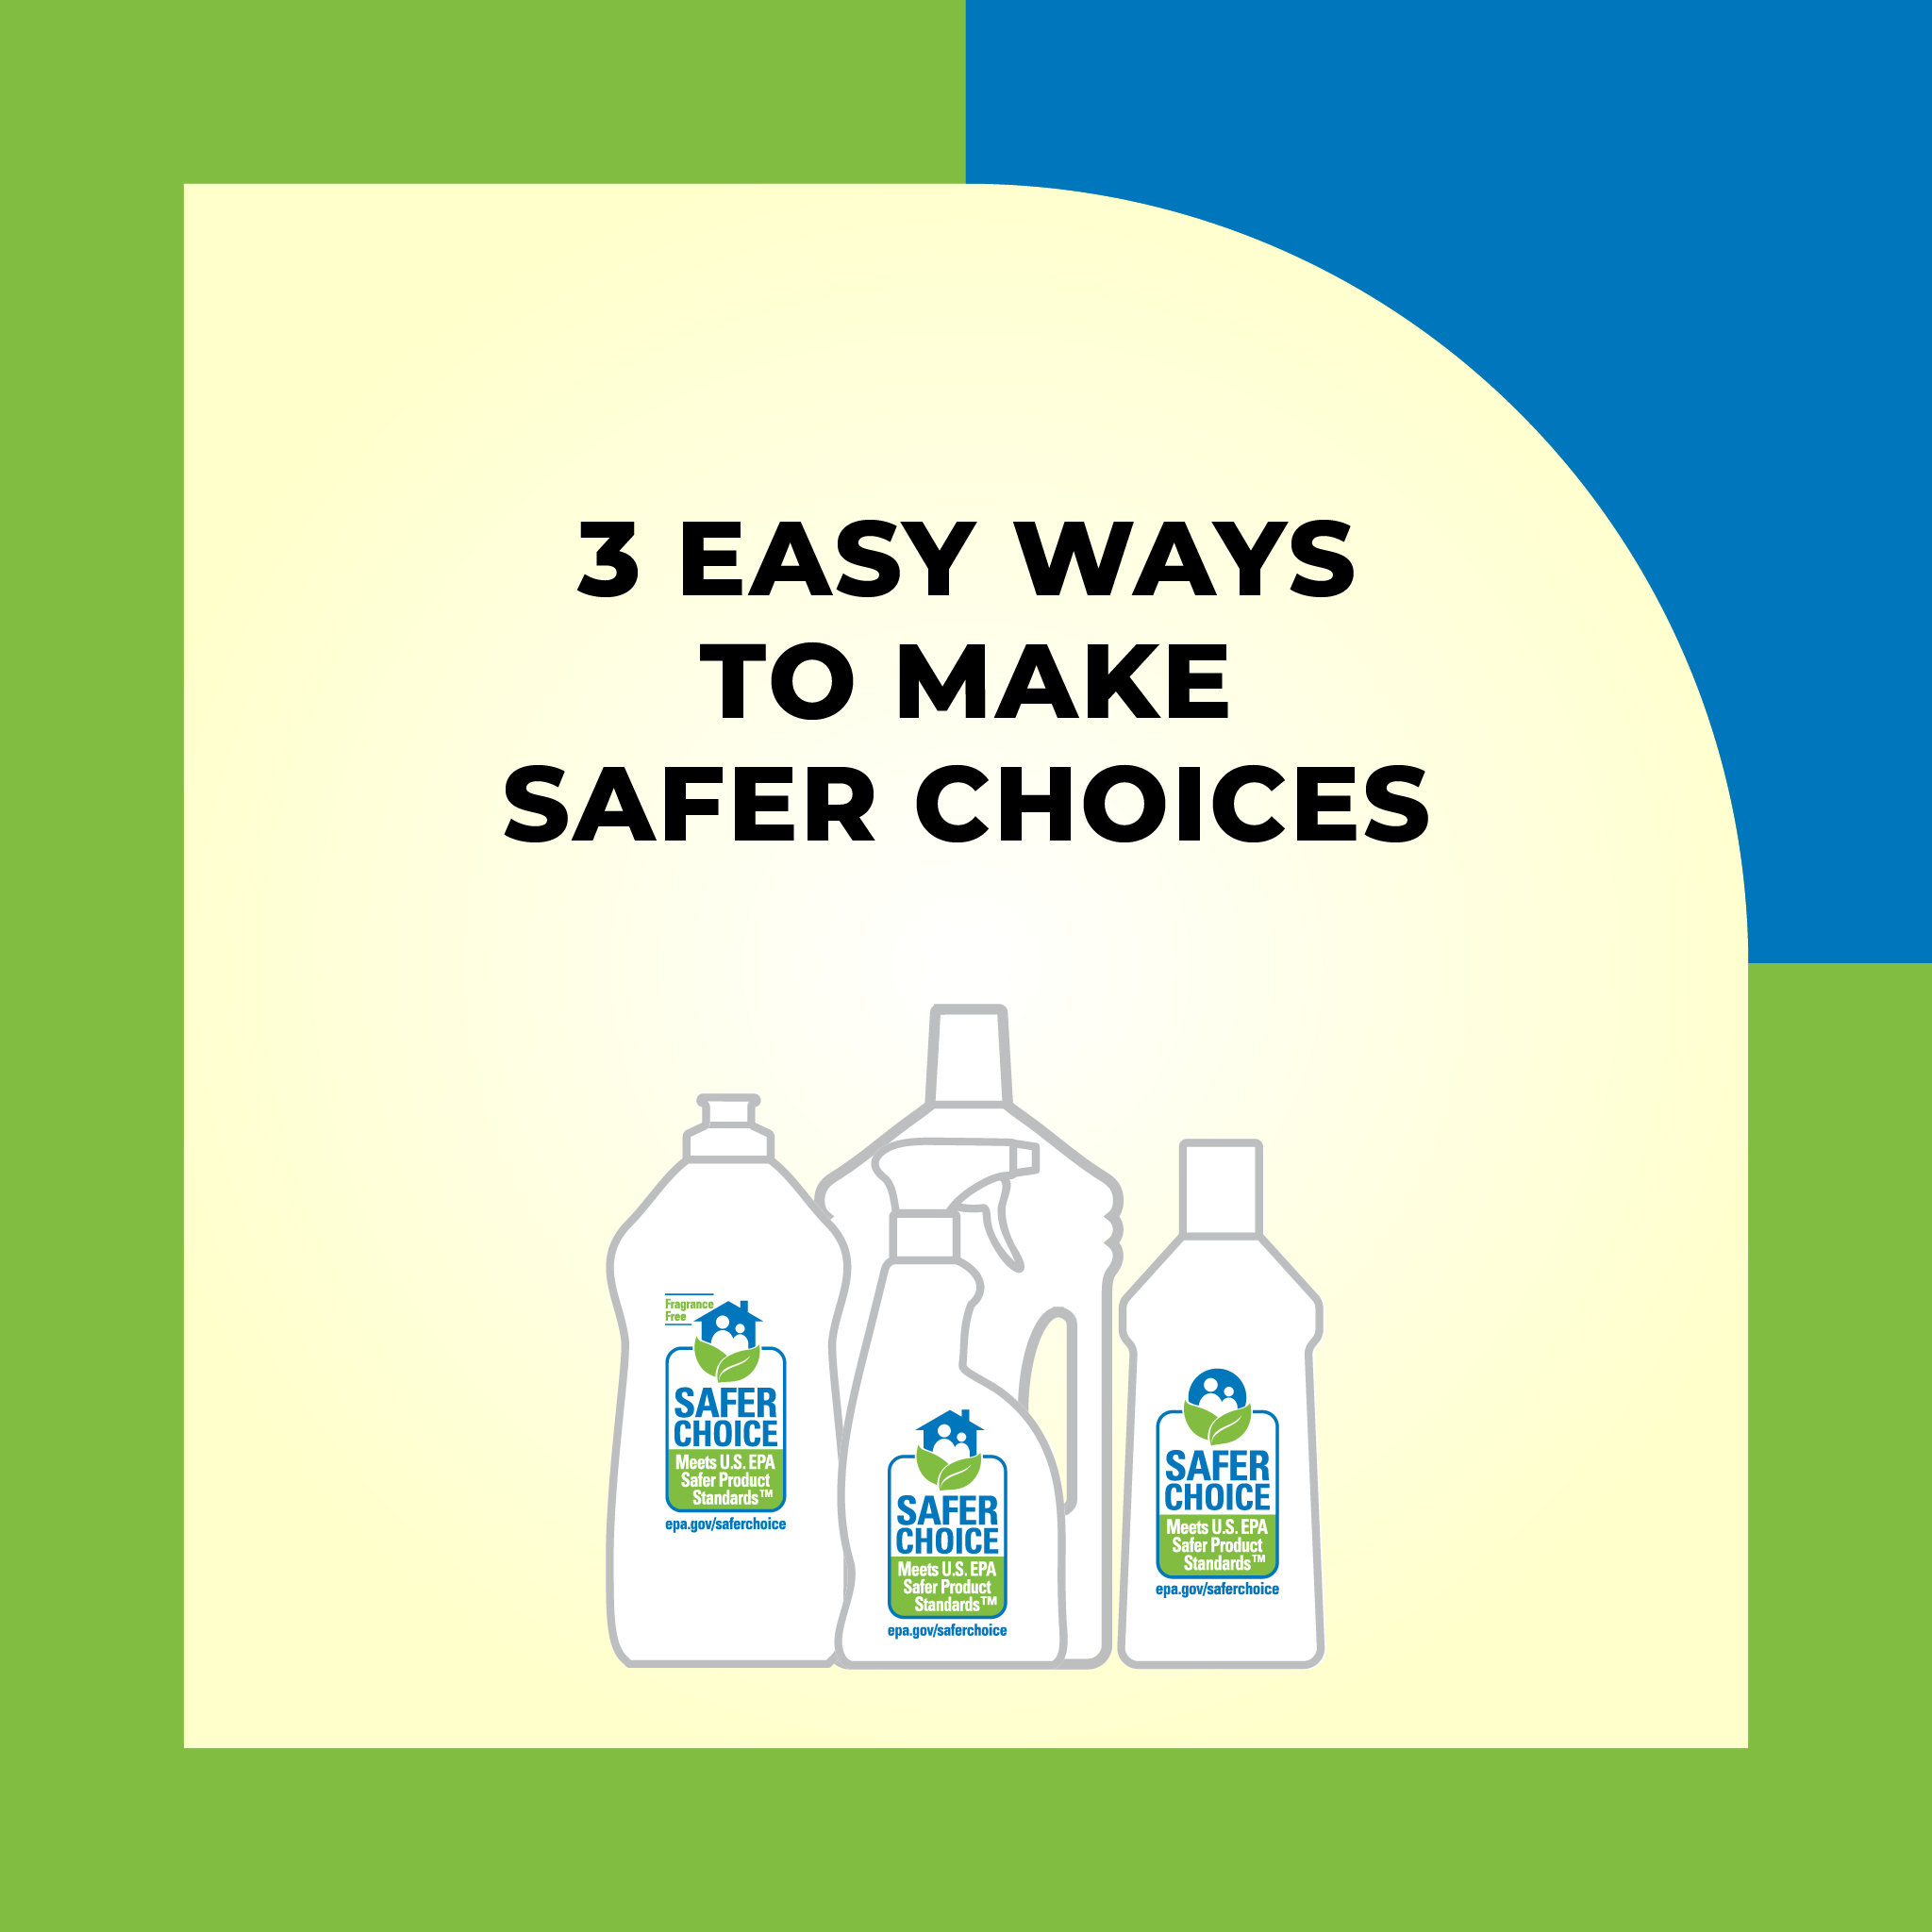 3 Tips for Choosing Safer Personal Care Products